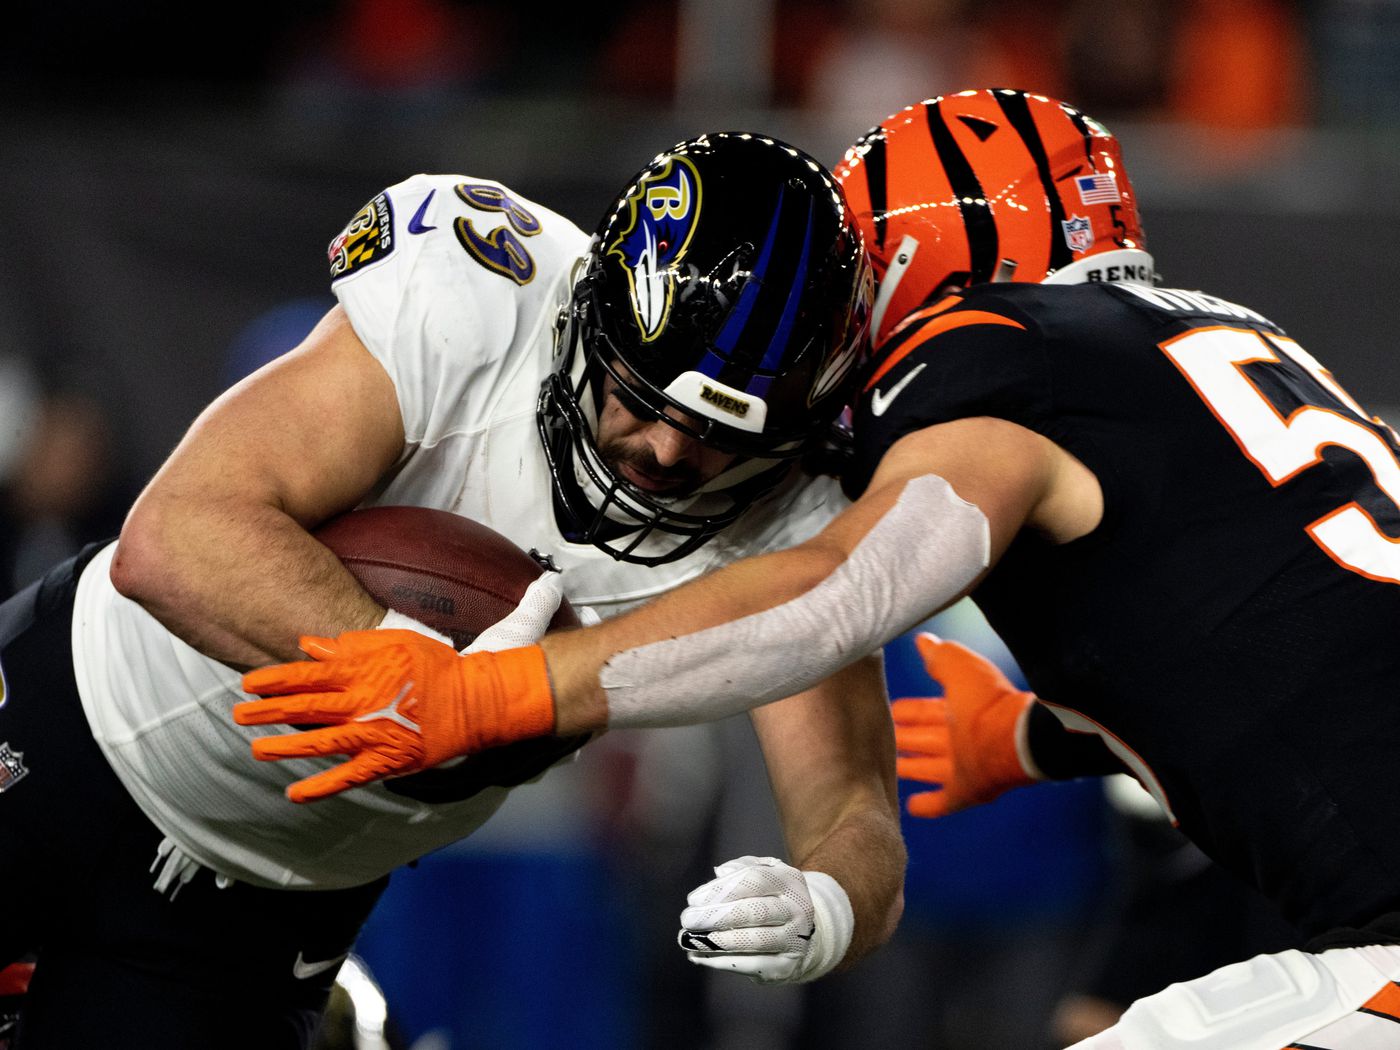 What time is the Baltimore Ravens vs. Cincinnati Bengals game